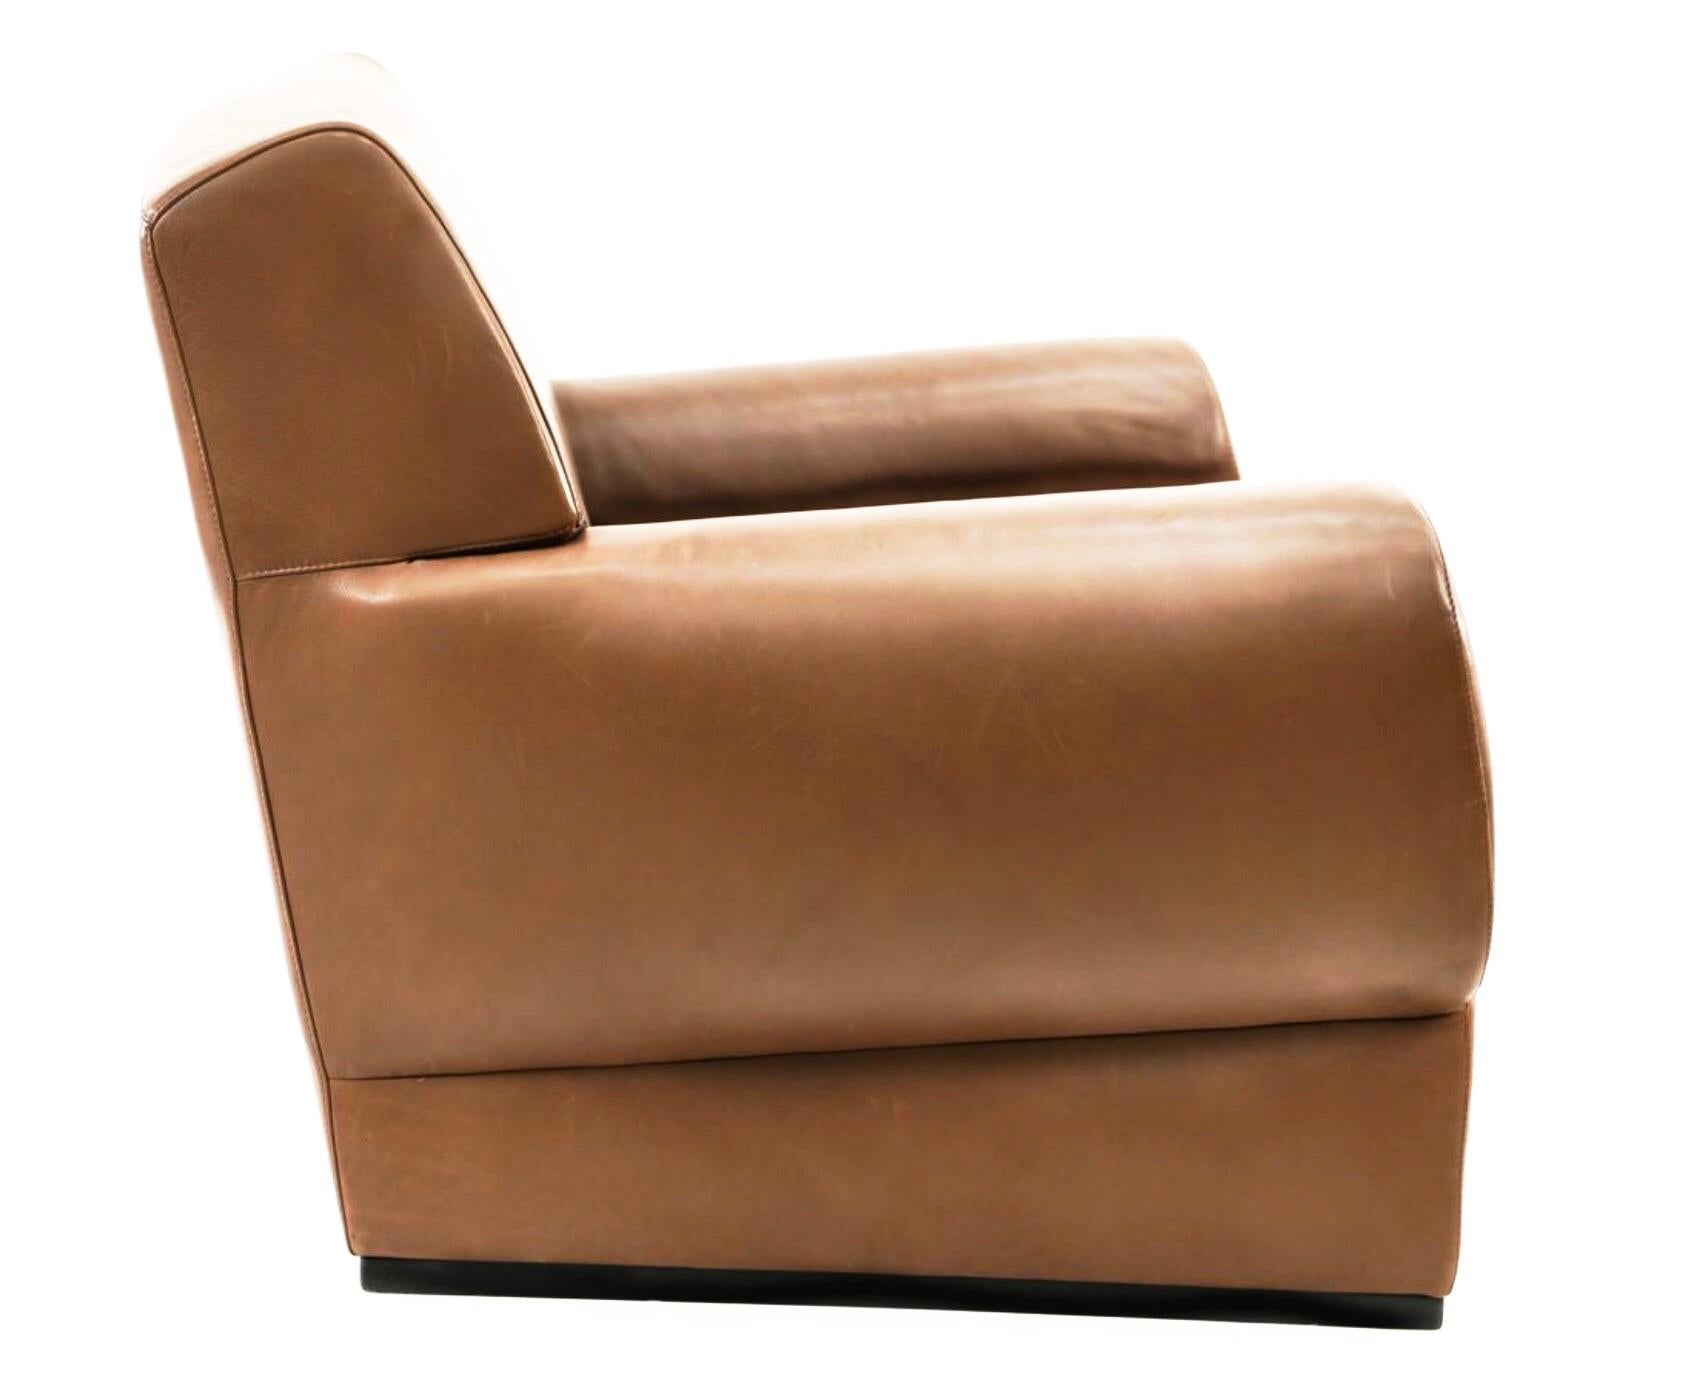 Giorgio Armani Casa brown leather Metropolian club chair. Geometric Deco armchair. Gorgeous, substantial piece, sculptural / geometric form, gorgeous lines. Softed square back and gently rounded arms. Stunning patina. Armani label, circa 2002. MSRP